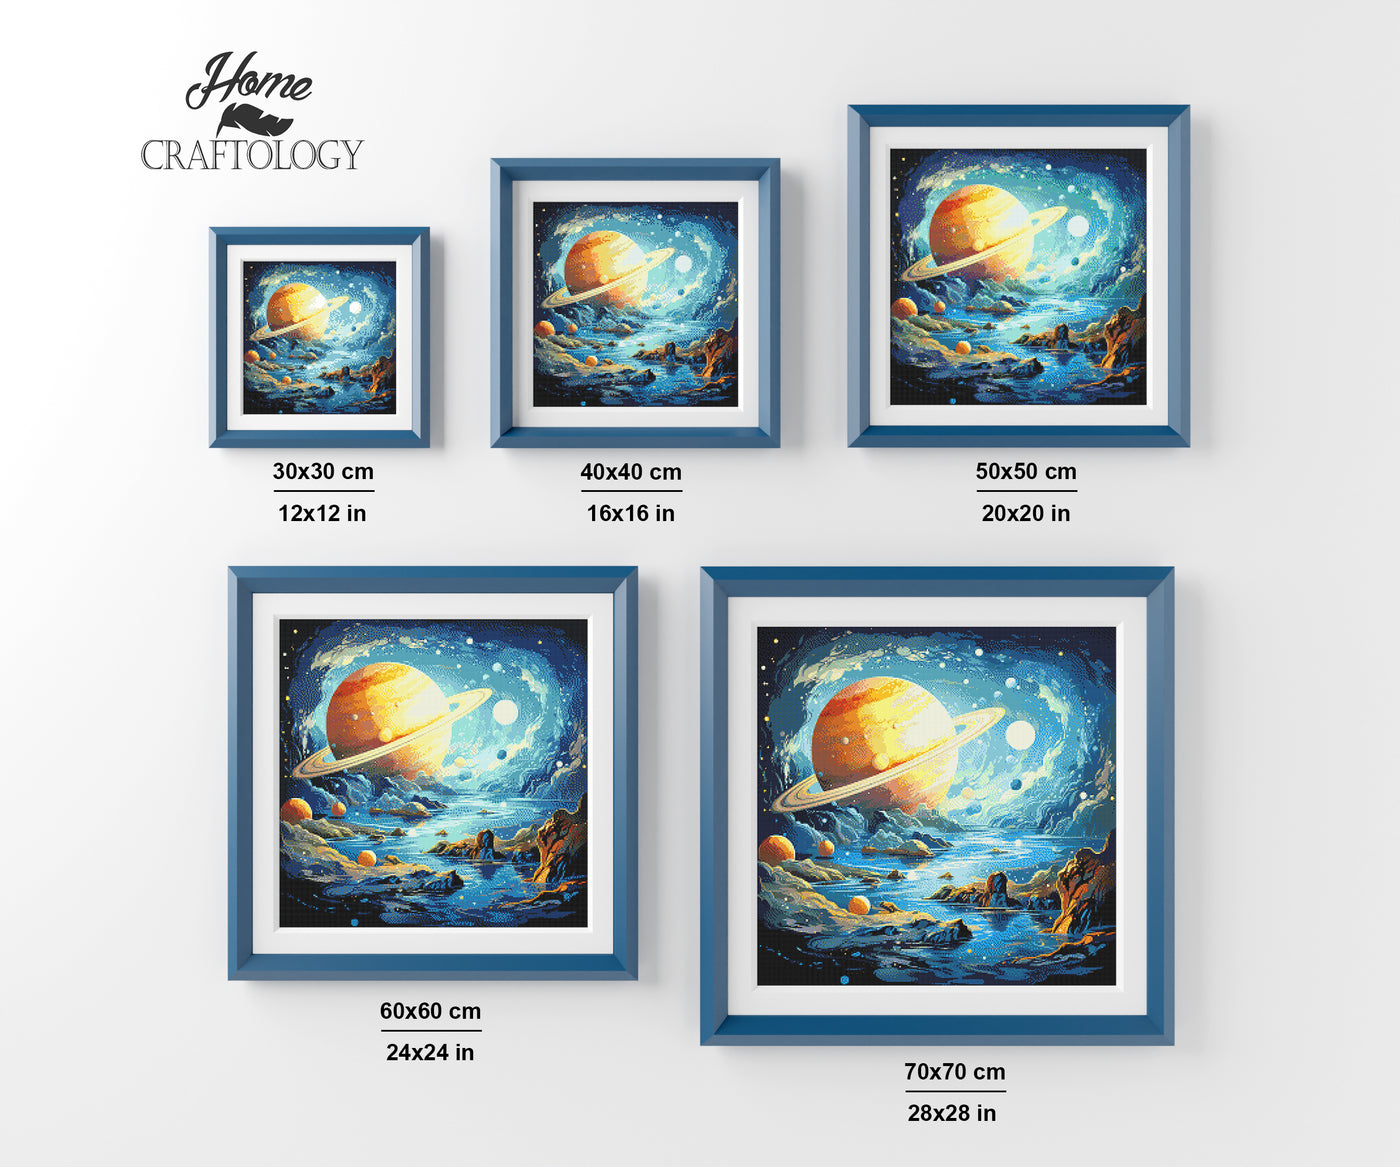 Saturn with Other Planets - Premium Diamond Painting Kit